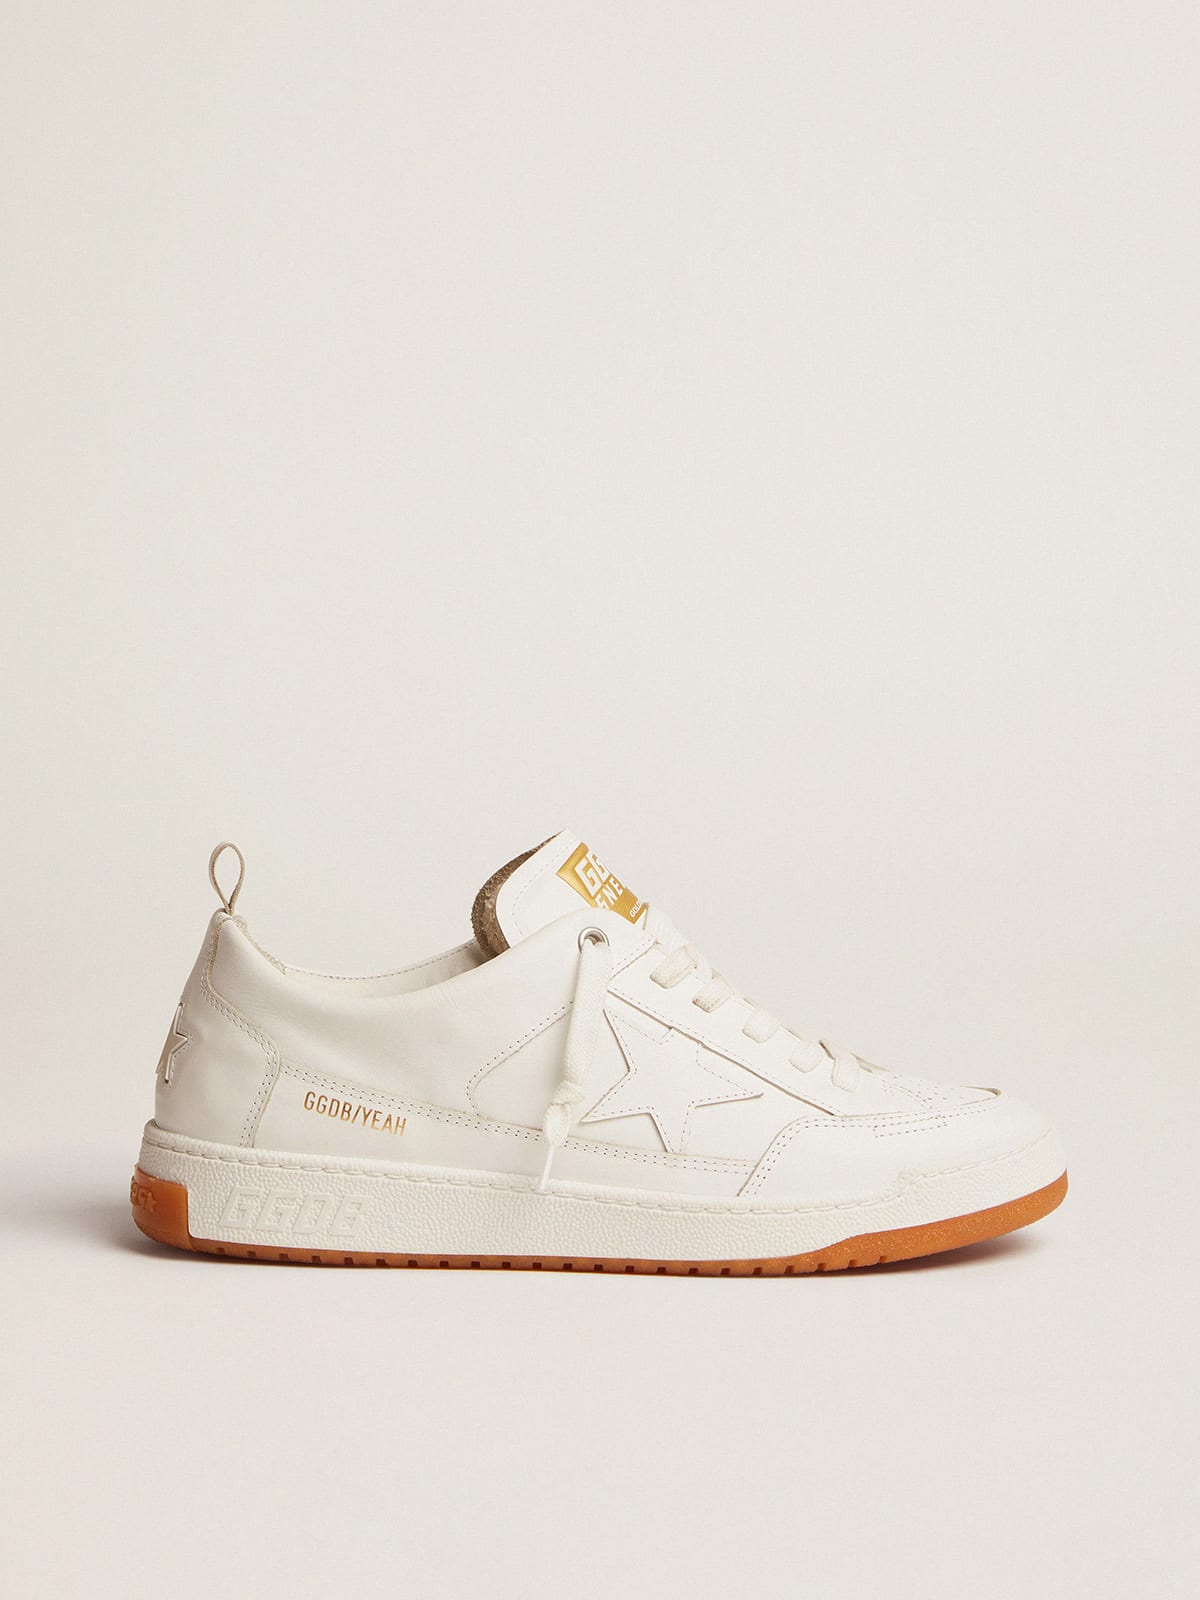 Men's Yeah sneakers in optical white leather